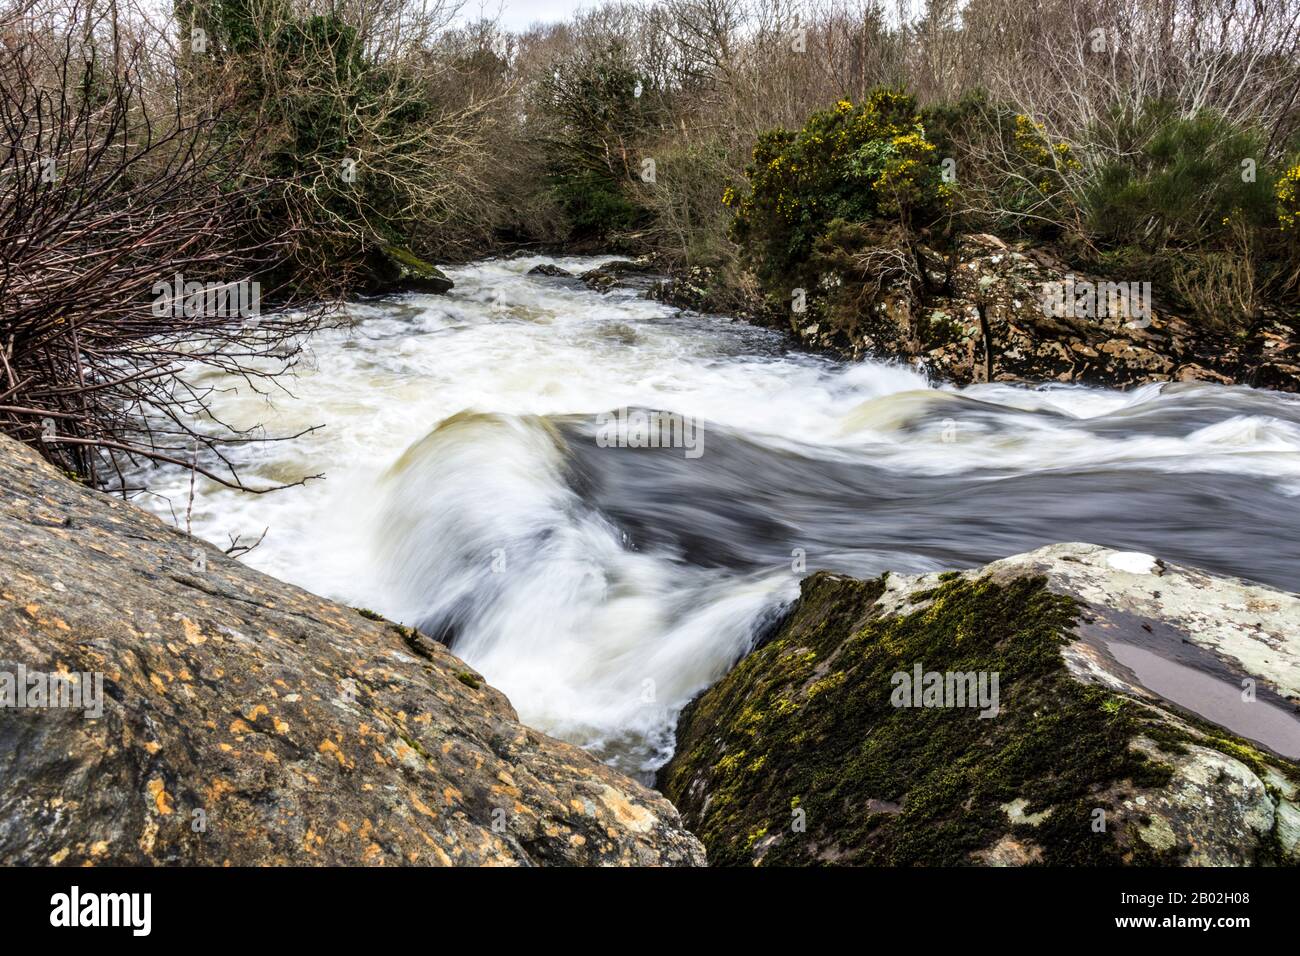 Fast flowing water passes over rocks in the River Owentocker at Ardara, County Donegal, Ireland Stock Photo